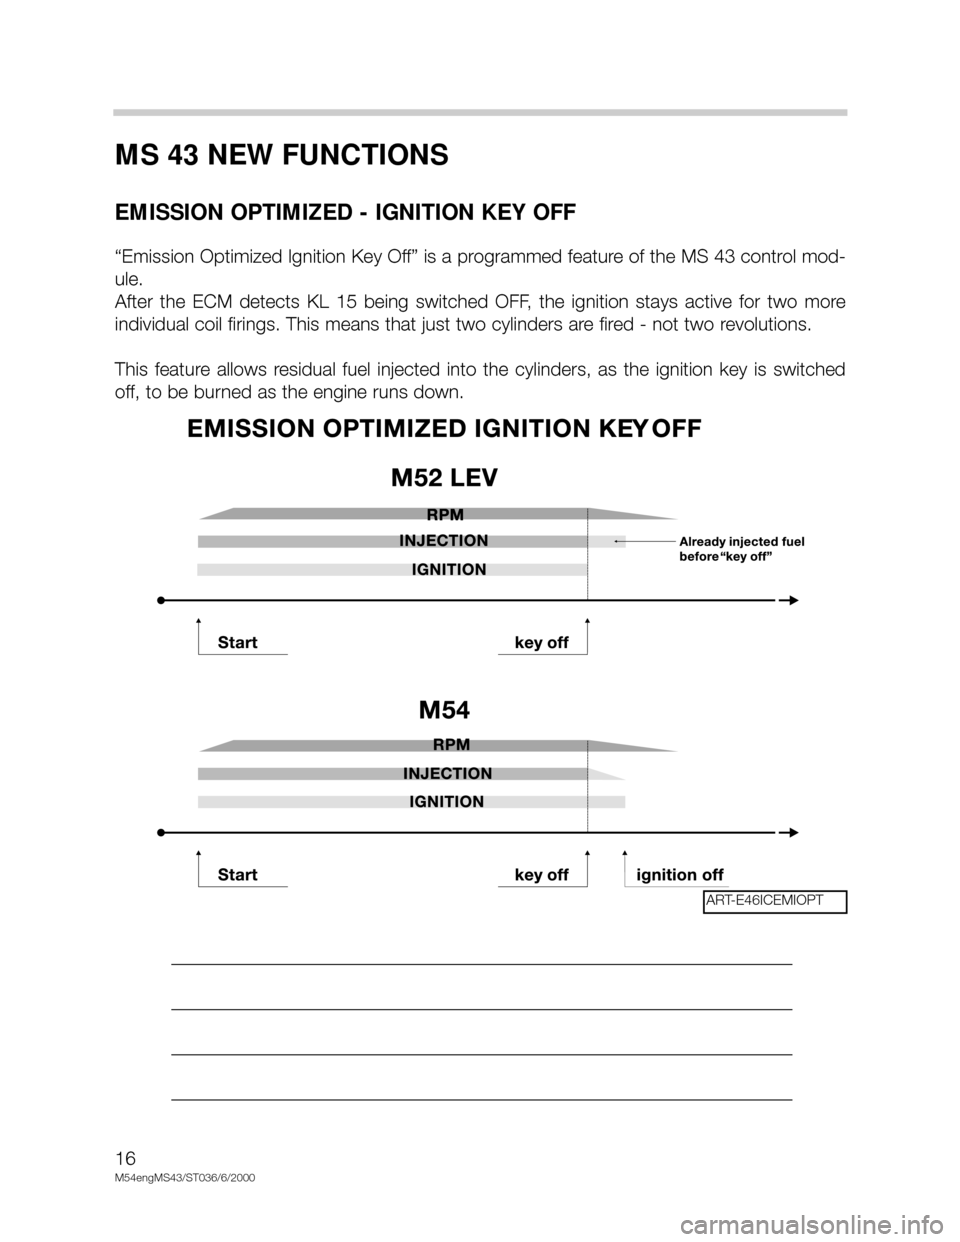 BMW X5 2000 E53 M54 Engine User Guide 16
M54engMS43/ST036/6/2000
MS 43 NEW FUNCTIONS
EMISSION OPTIMIZED - IGNITION KEY OFF
“Emission Optimized Ignition Key Off” is a programmed feature of the MS 43 control mod-
ule. 
After  the  ECM  